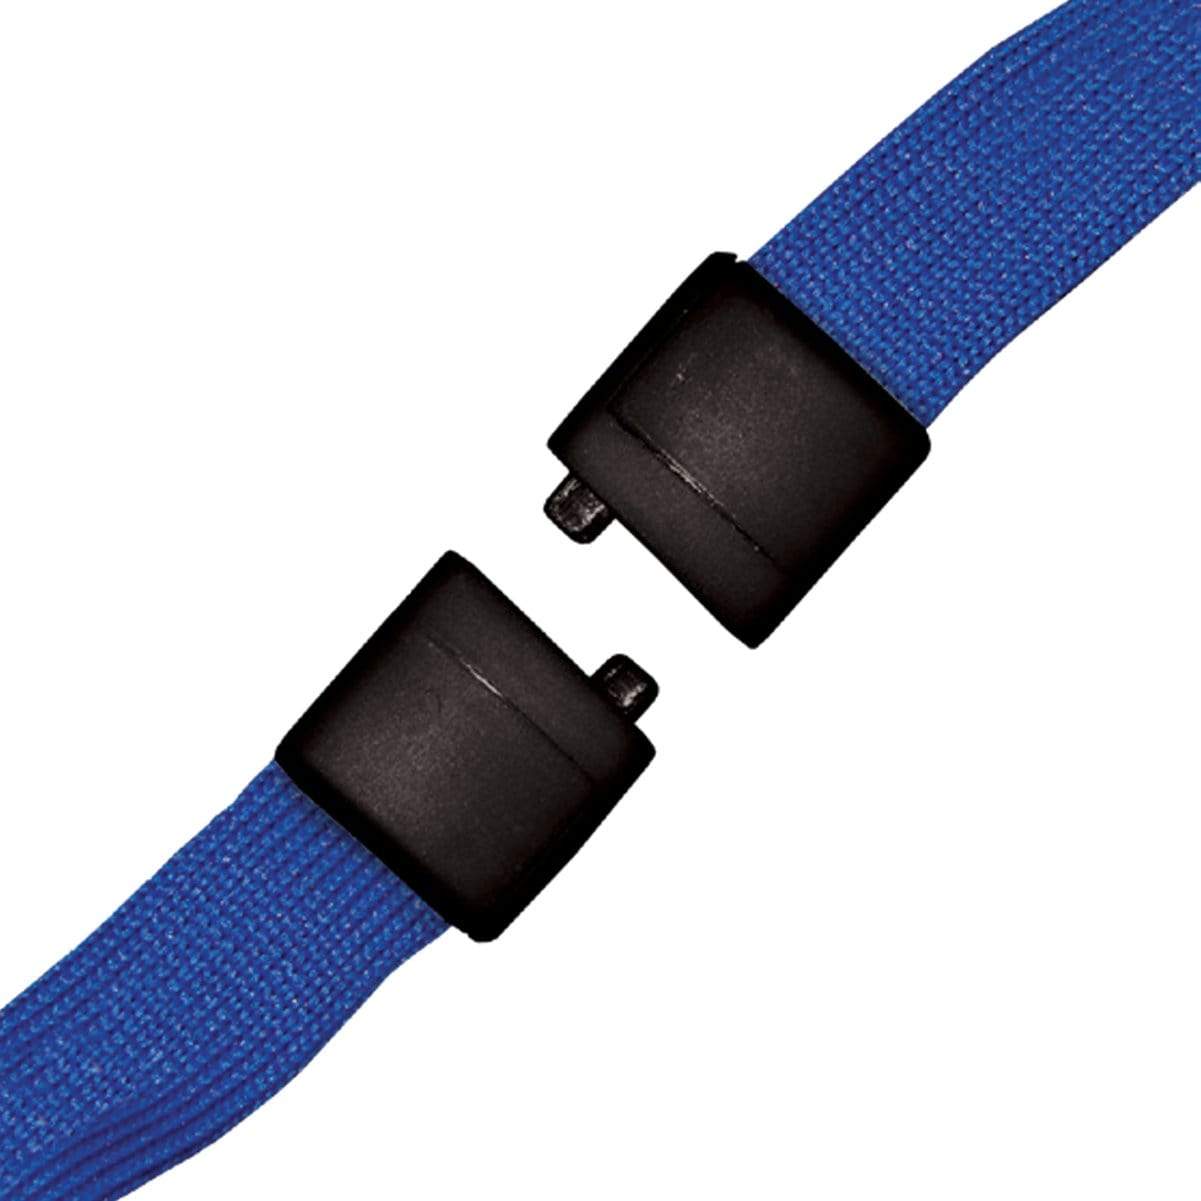 Adjustable Double Ended Lanyards with Safety Breakaway Clasp and Two Bulldog Clips (2140-531X)